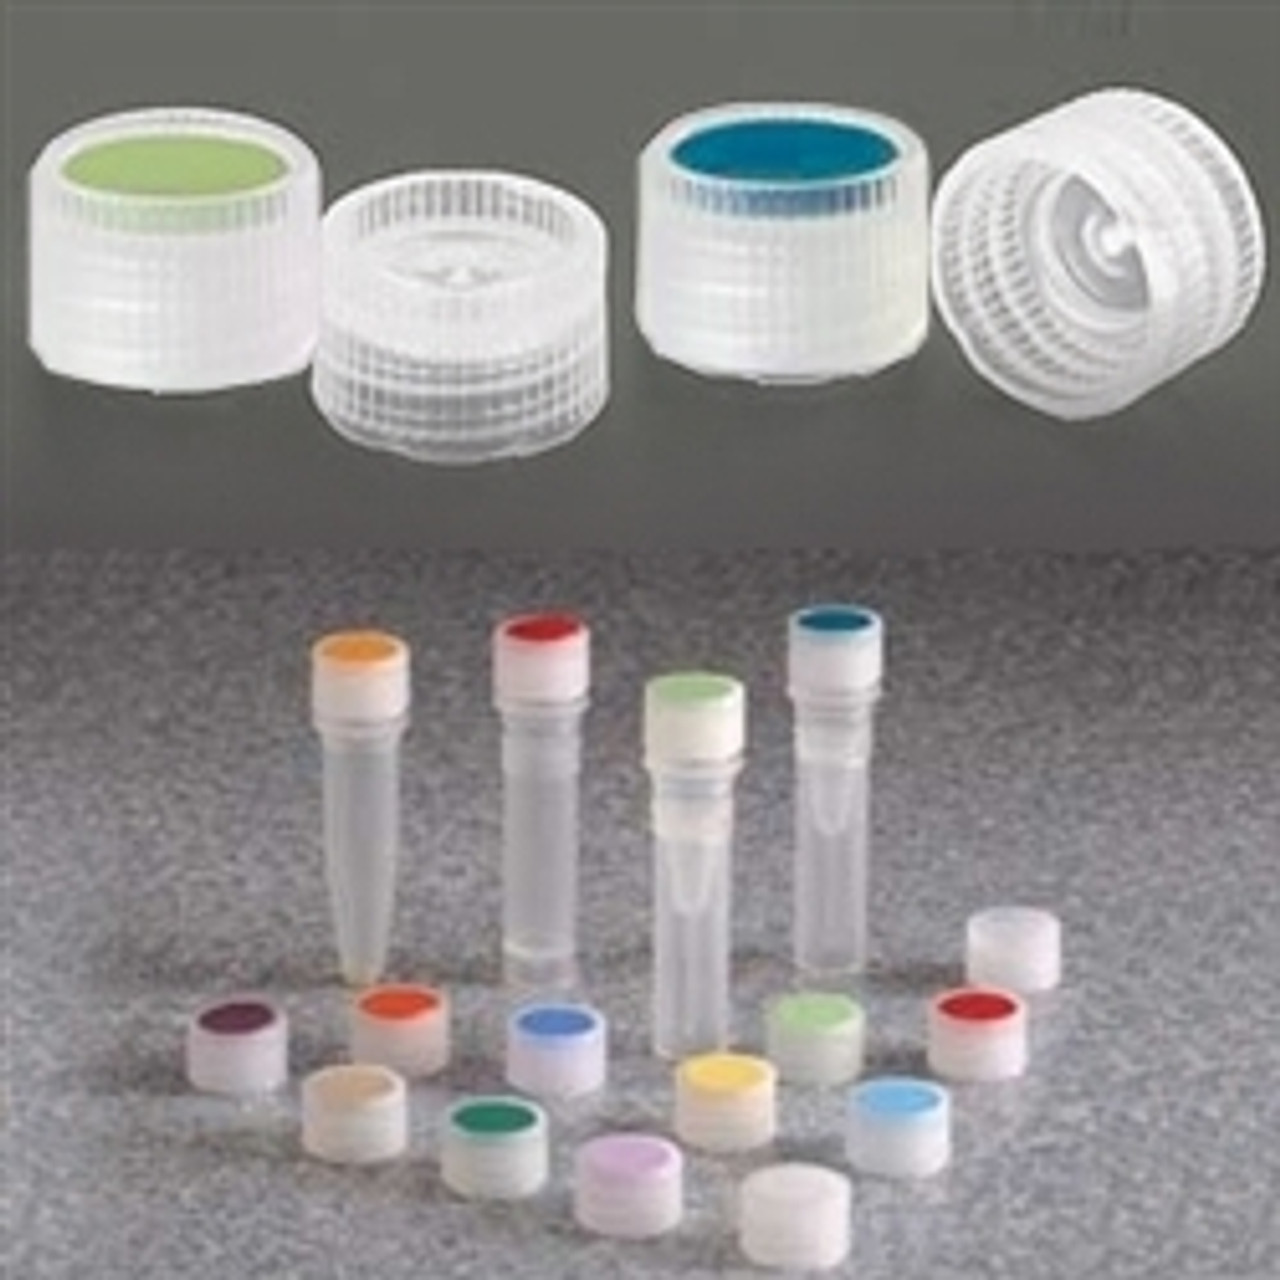 Nalgene® 342820 11mm Caps for Micro Packaging Vials with Color Coded Insert, Sterile, case/1000